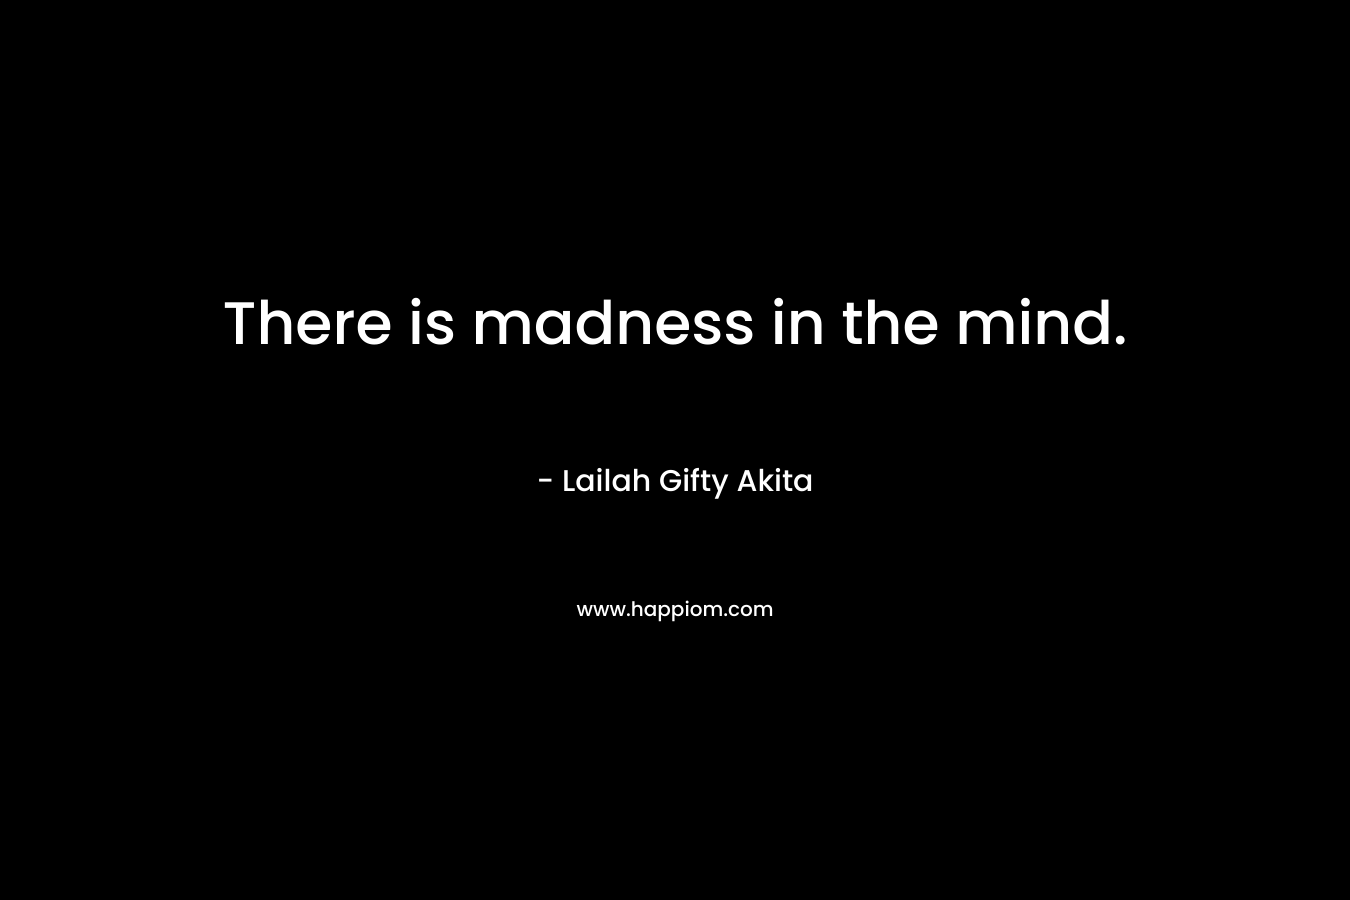 There is madness in the mind.